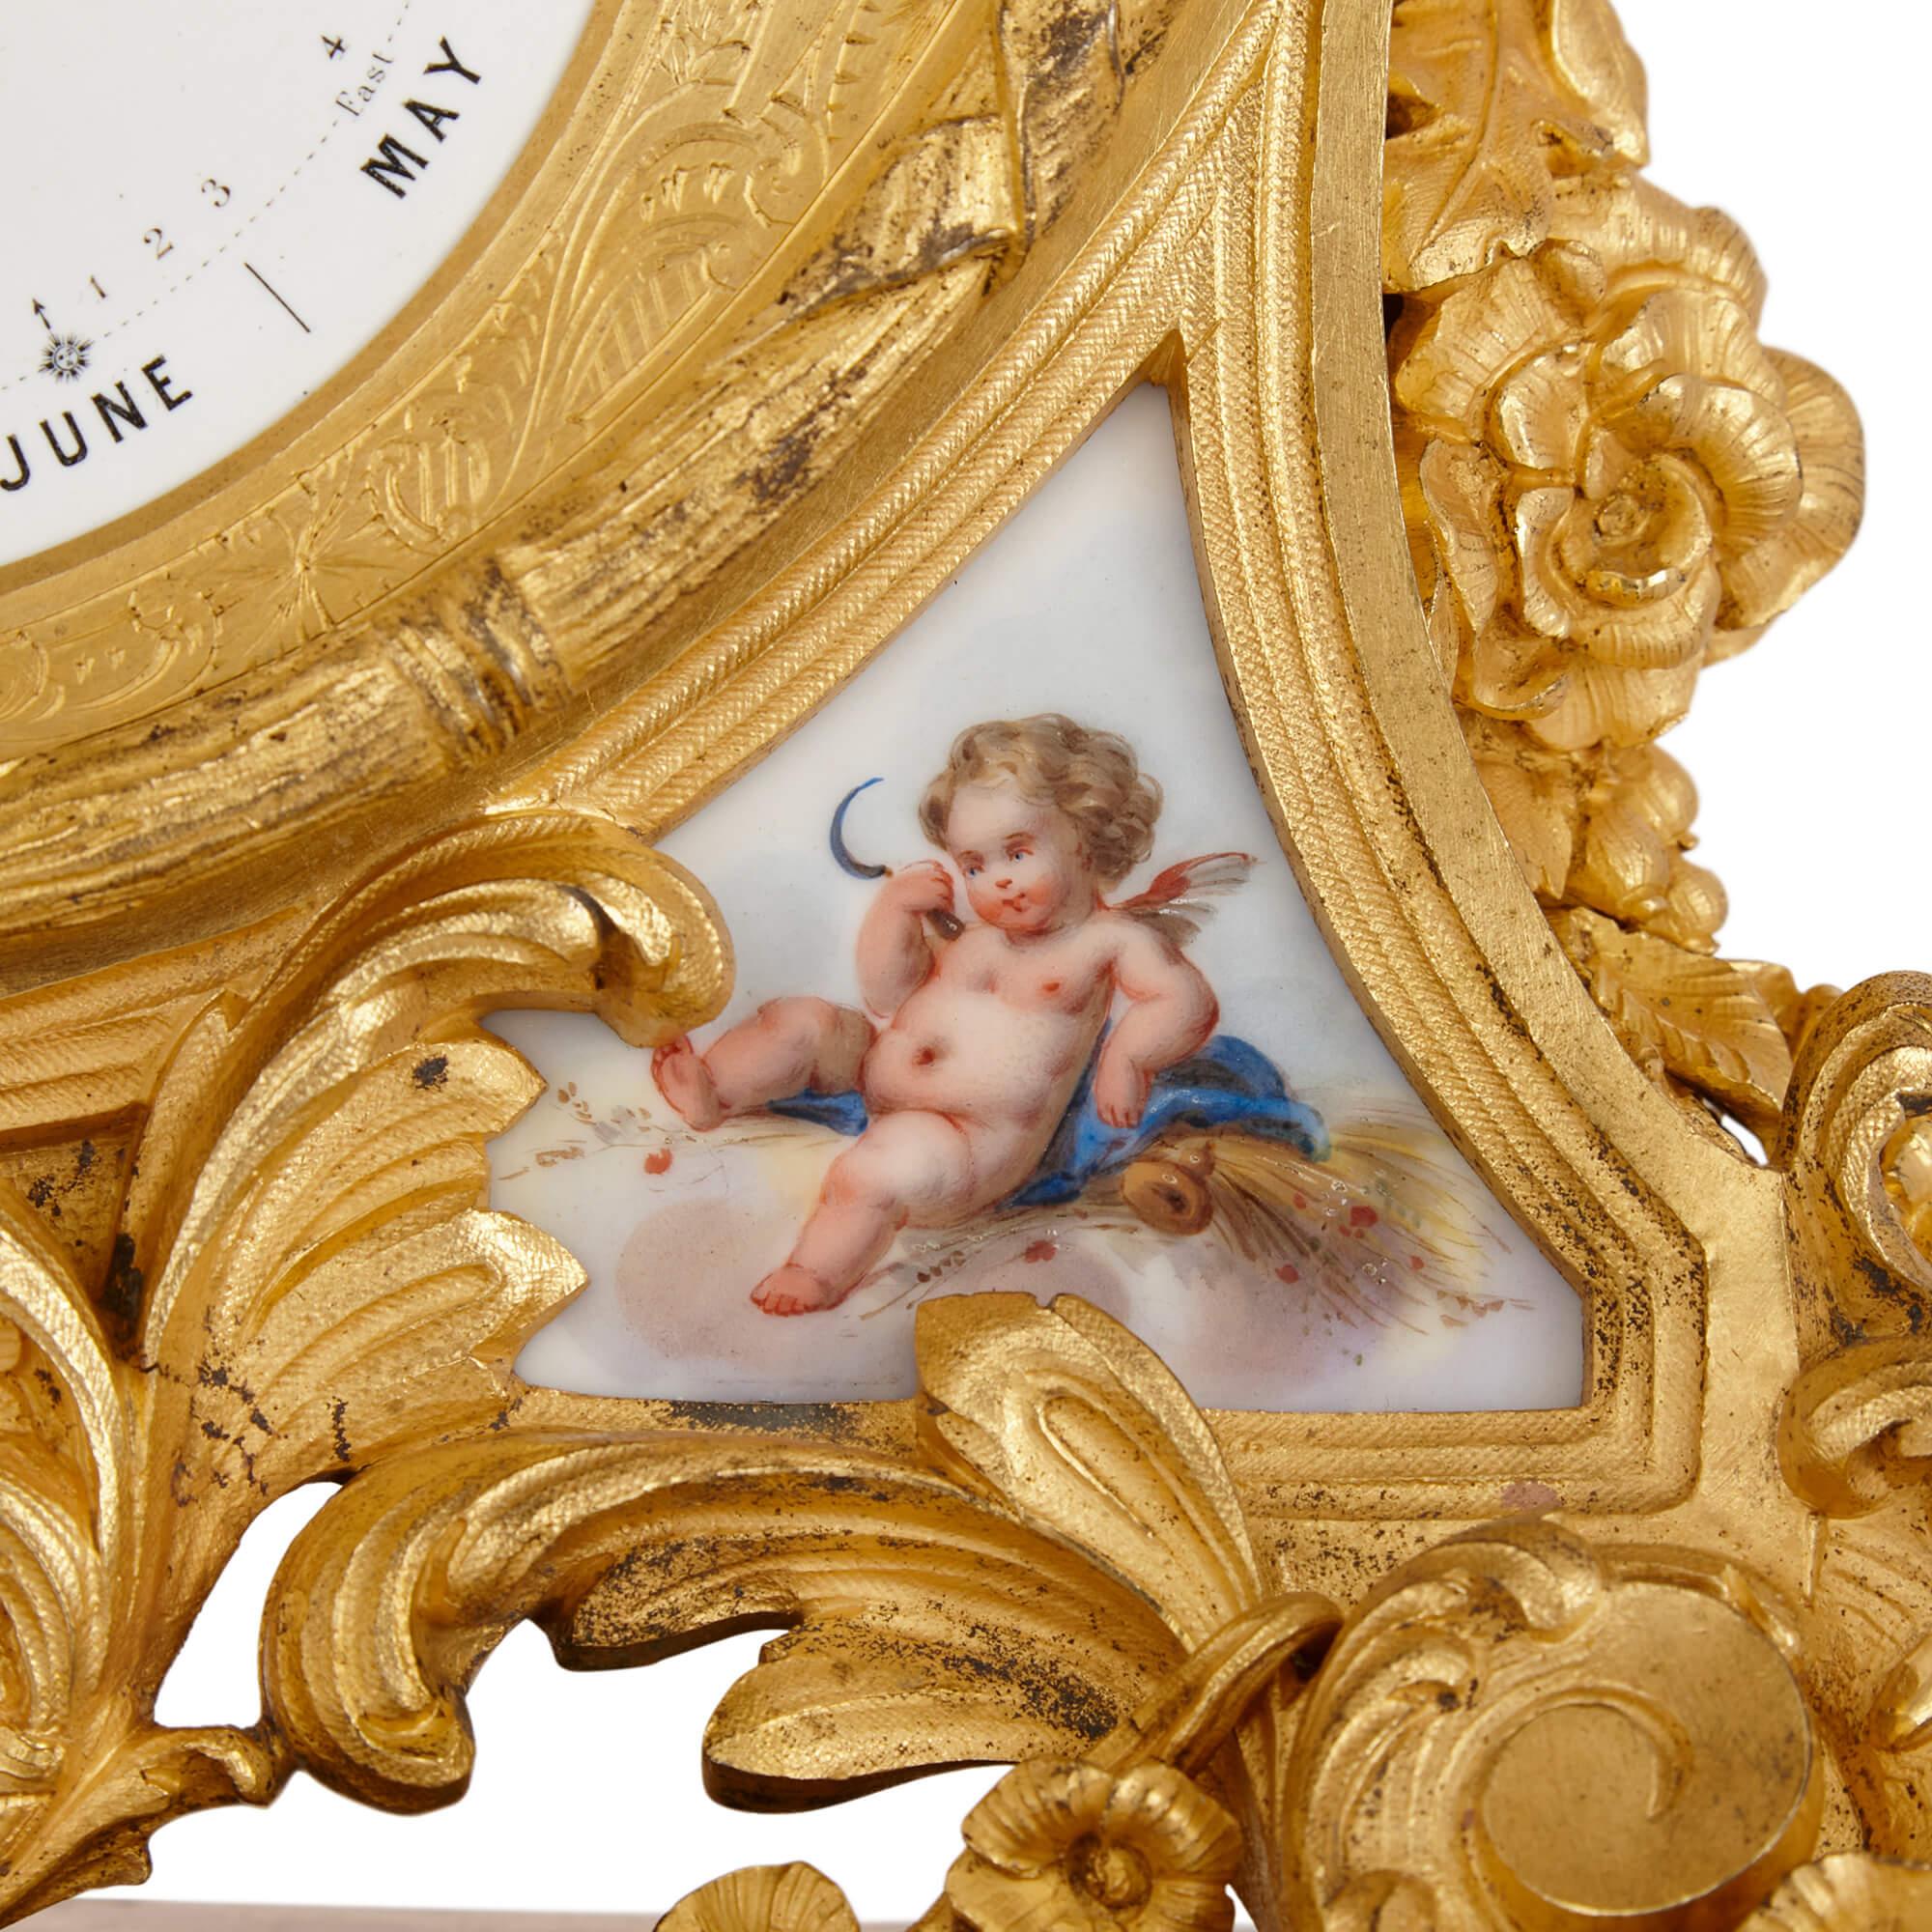 French Very Fine Ormolu and Sèvres-style Porcelain Calendar Mantel Clock For Sale